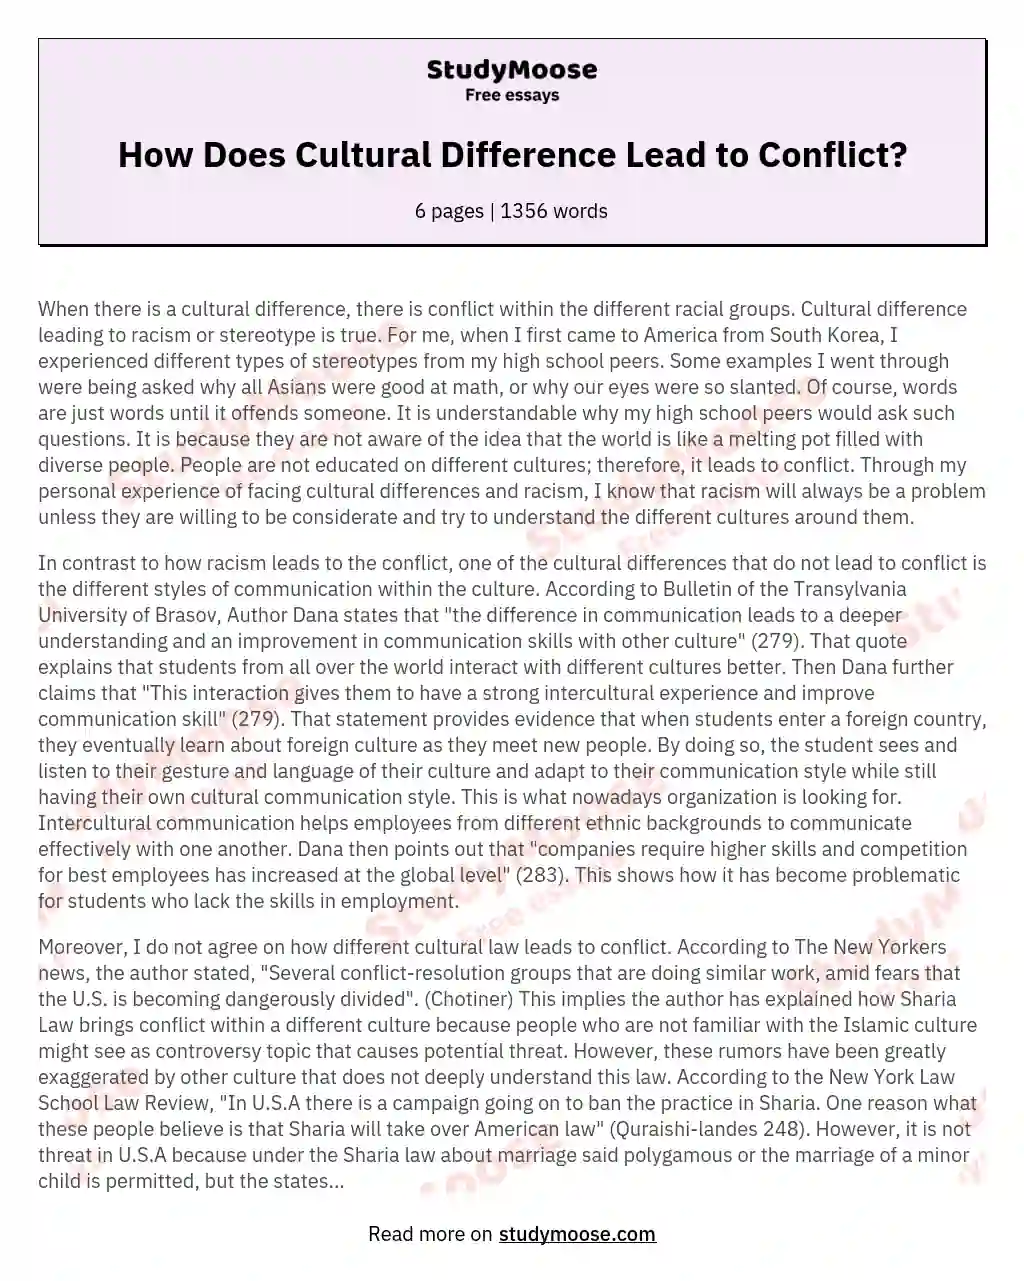 How Does Cultural Difference Lead to Conflict?